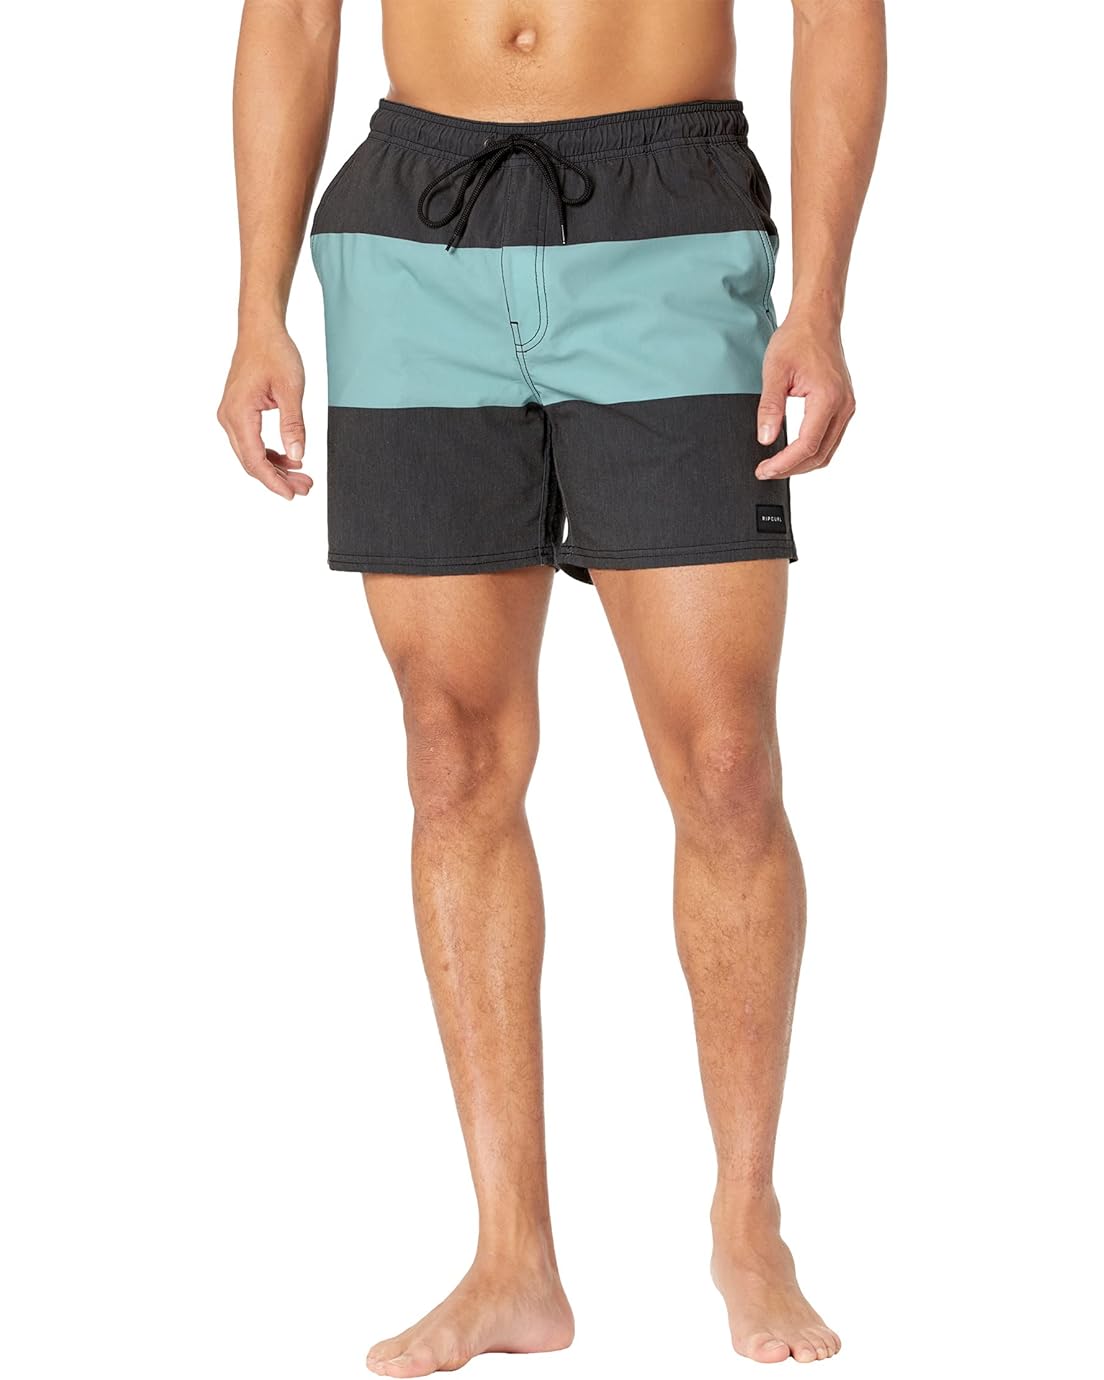 Rip Curl Divide 16 Volley